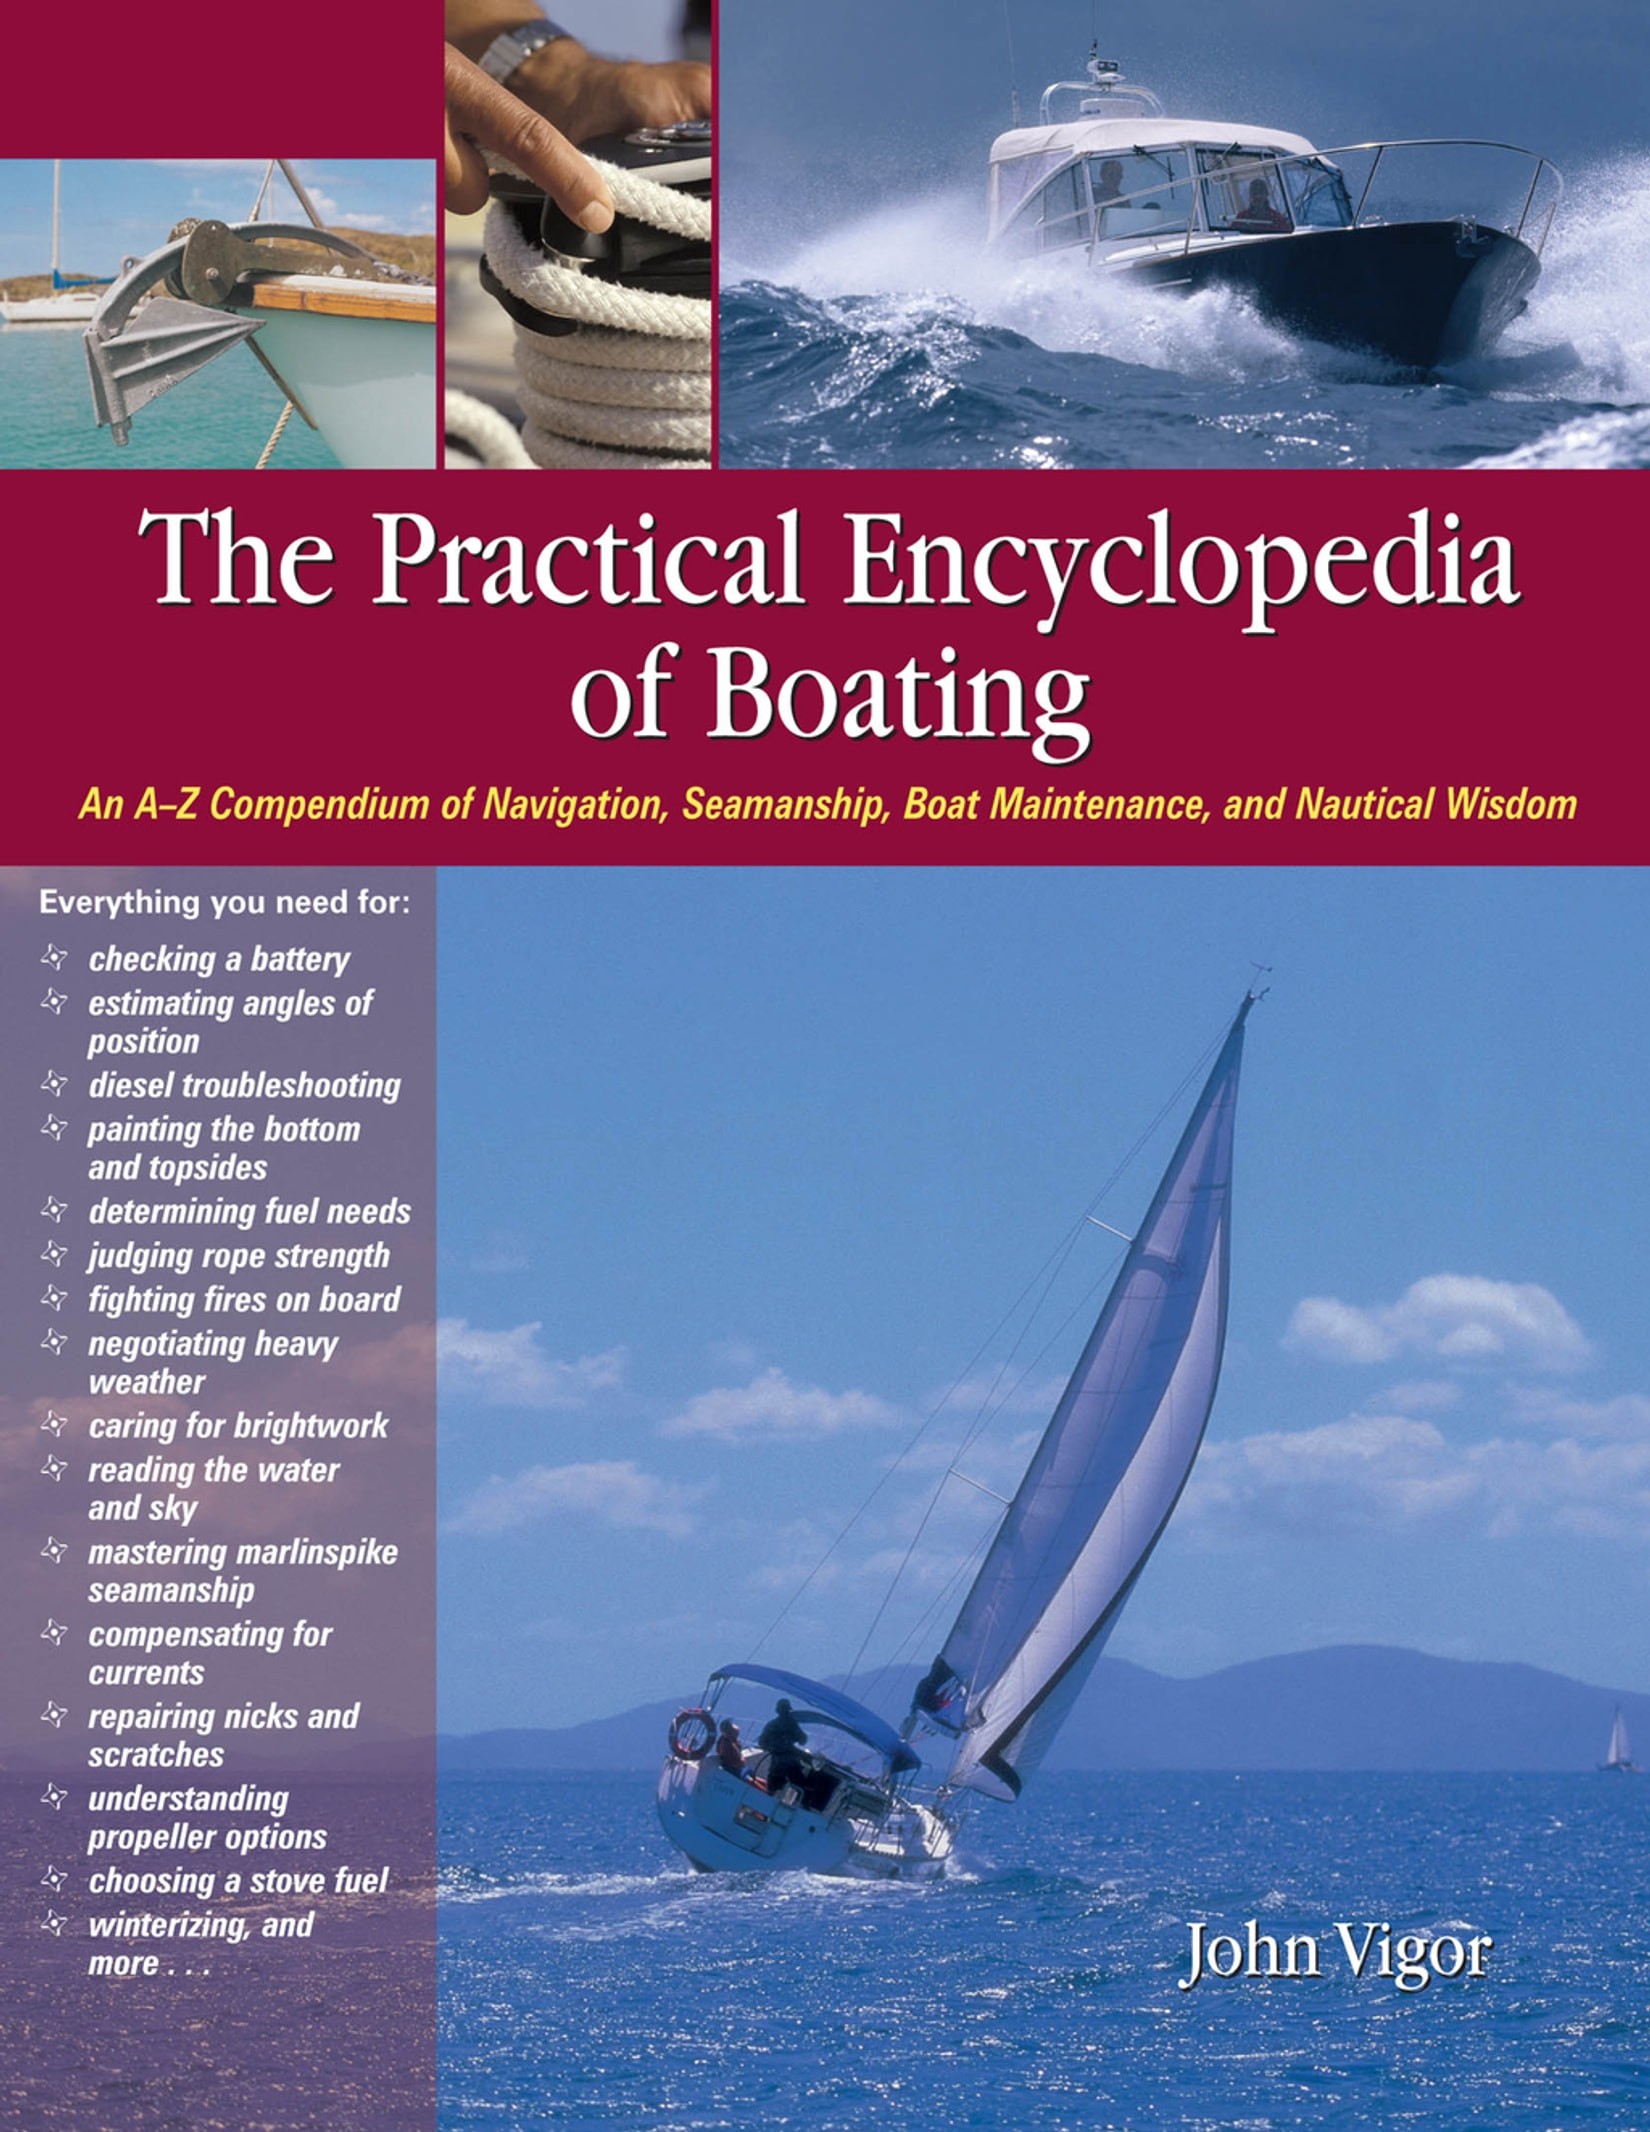 The Practical Encyclopedia of Boating: An A-Z Compendium of Navigation, Seamanship, Boat Maintenance, and Nautical Wisdom